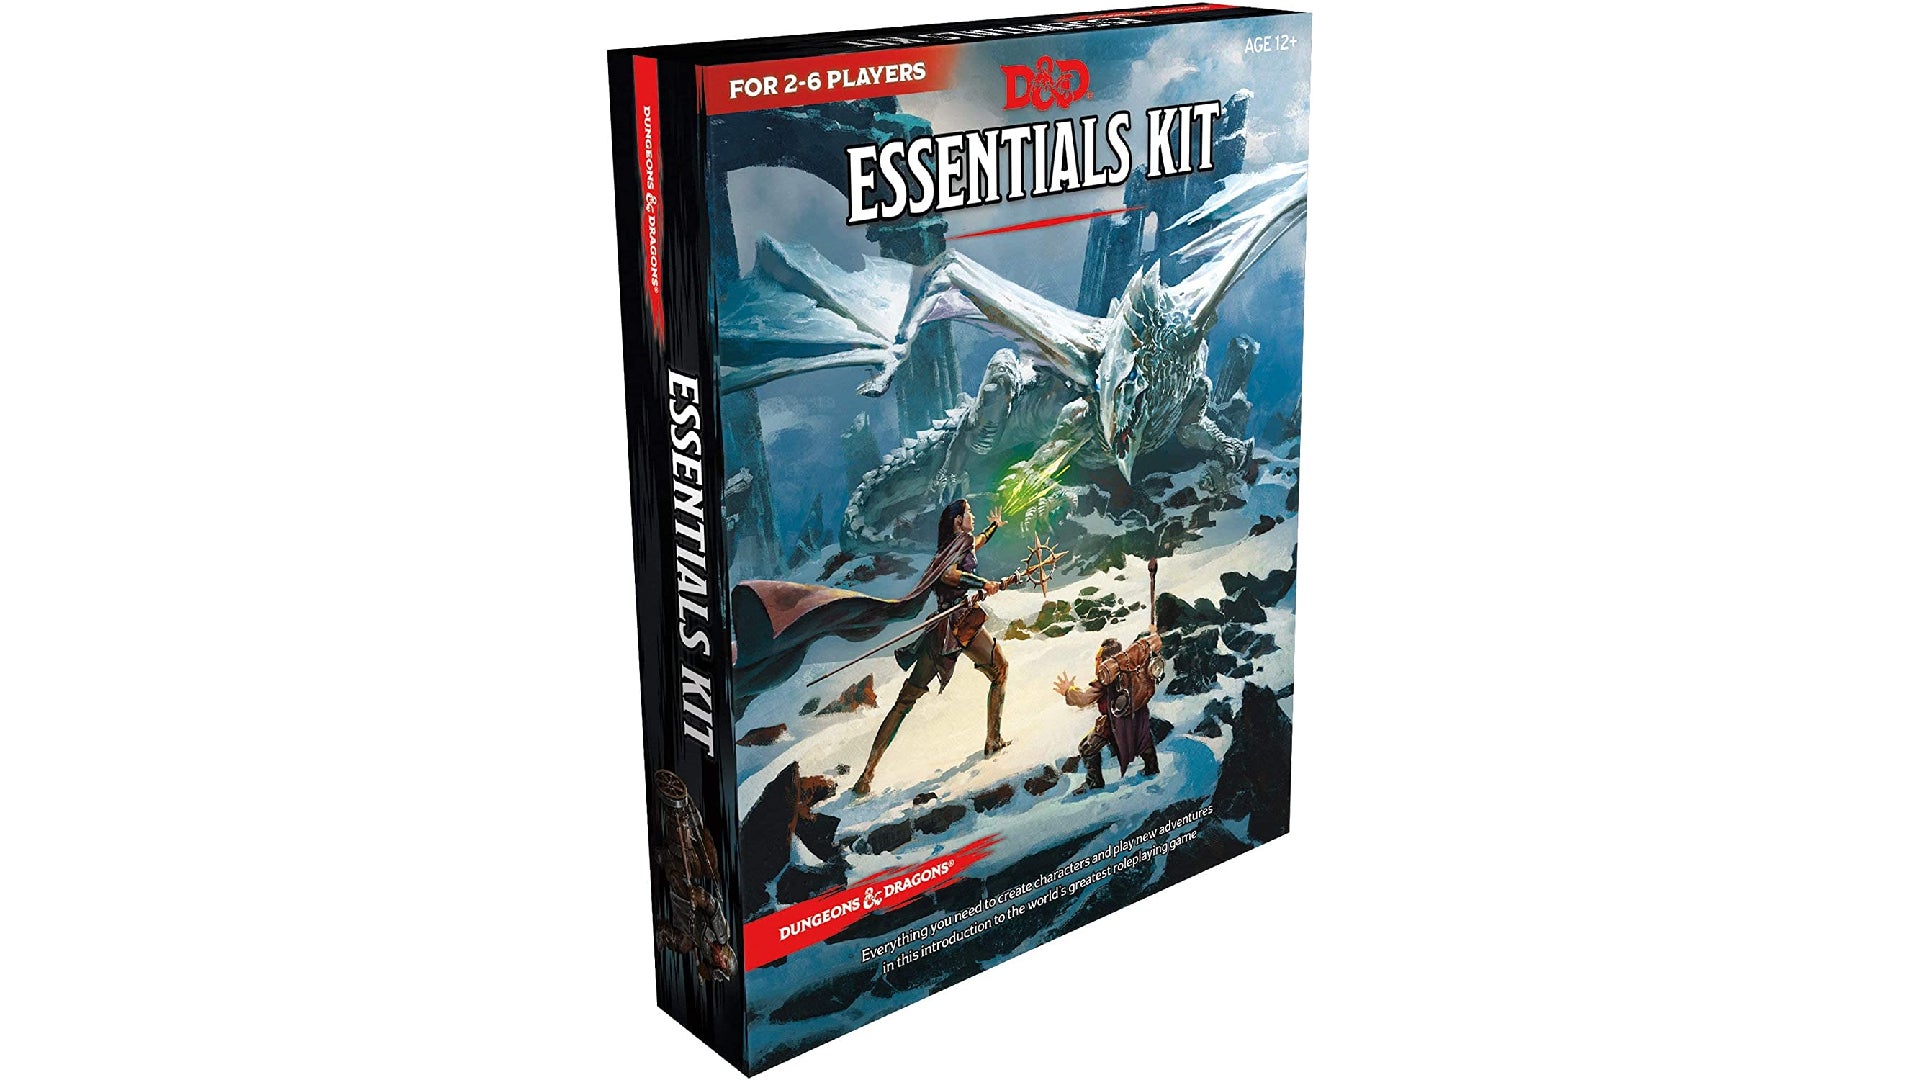 The Cover art of the D&D 5E essentials kit